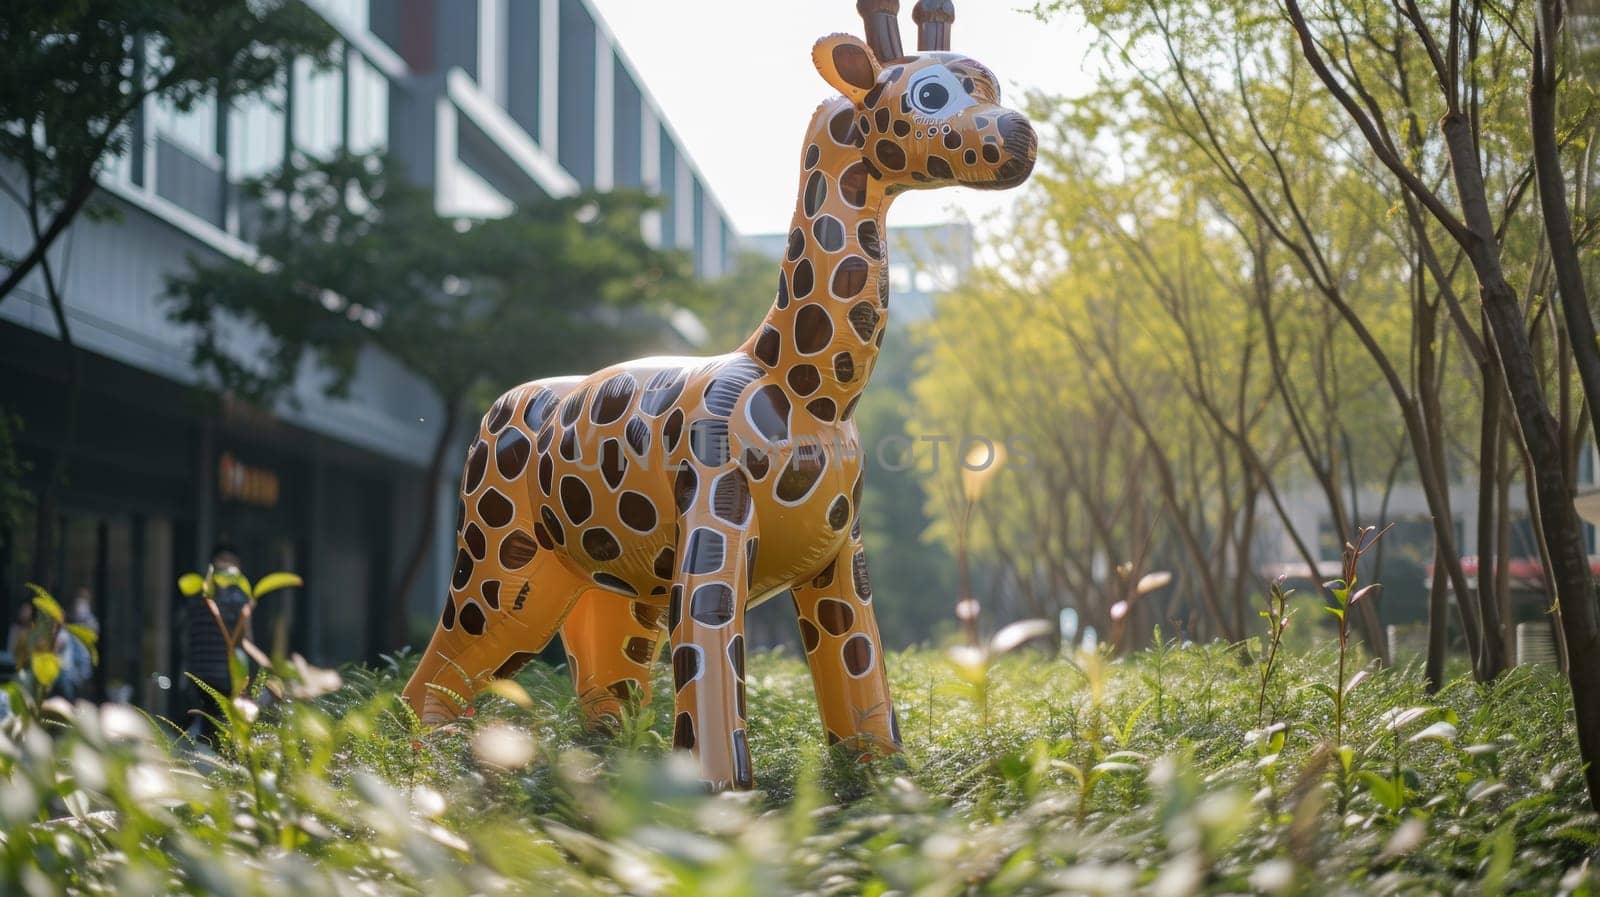 A giraffe statue in a grassy area with trees and buildings, AI by starush